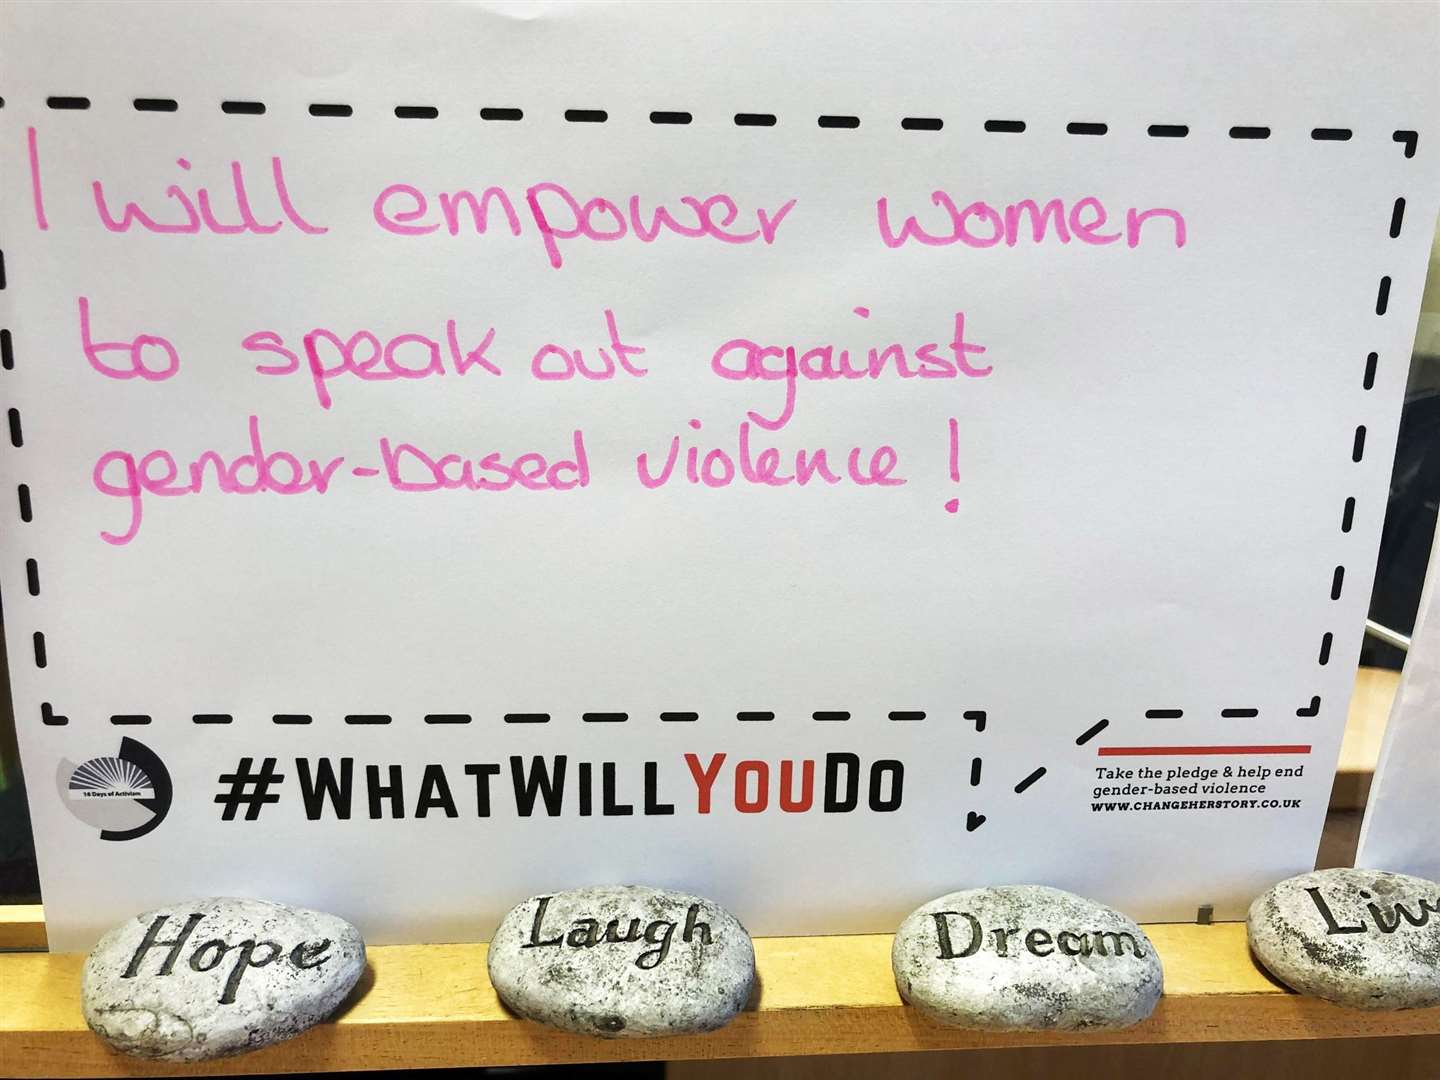 A powerful pledge as part of the 16 Days of Activism against Gender-based Violence.